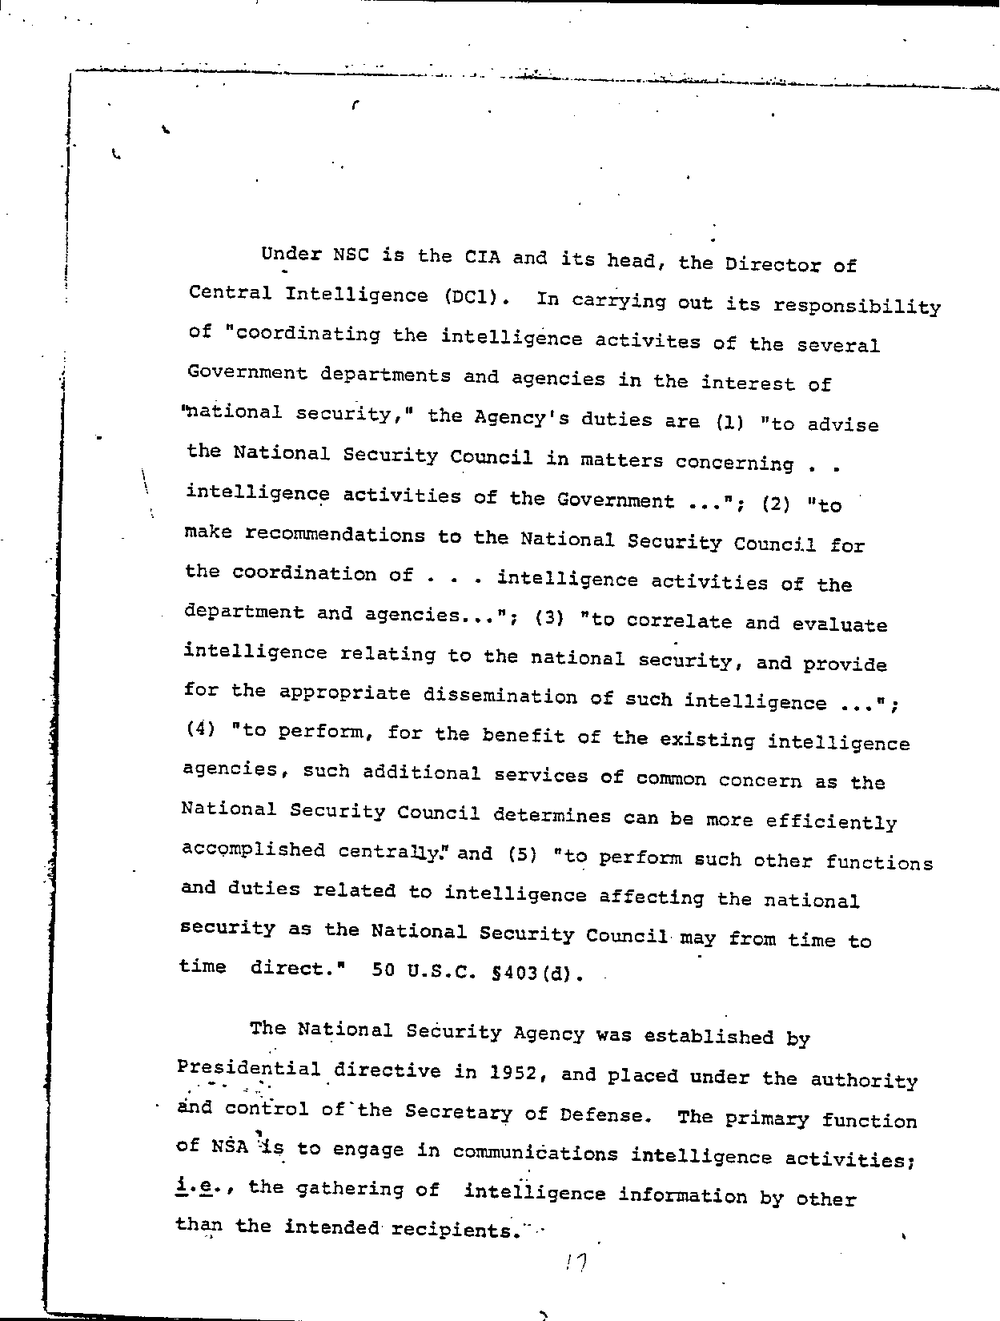 Page 18 from Department of Justice Prosecutive Summary into NSA and CIA Criminal Activities